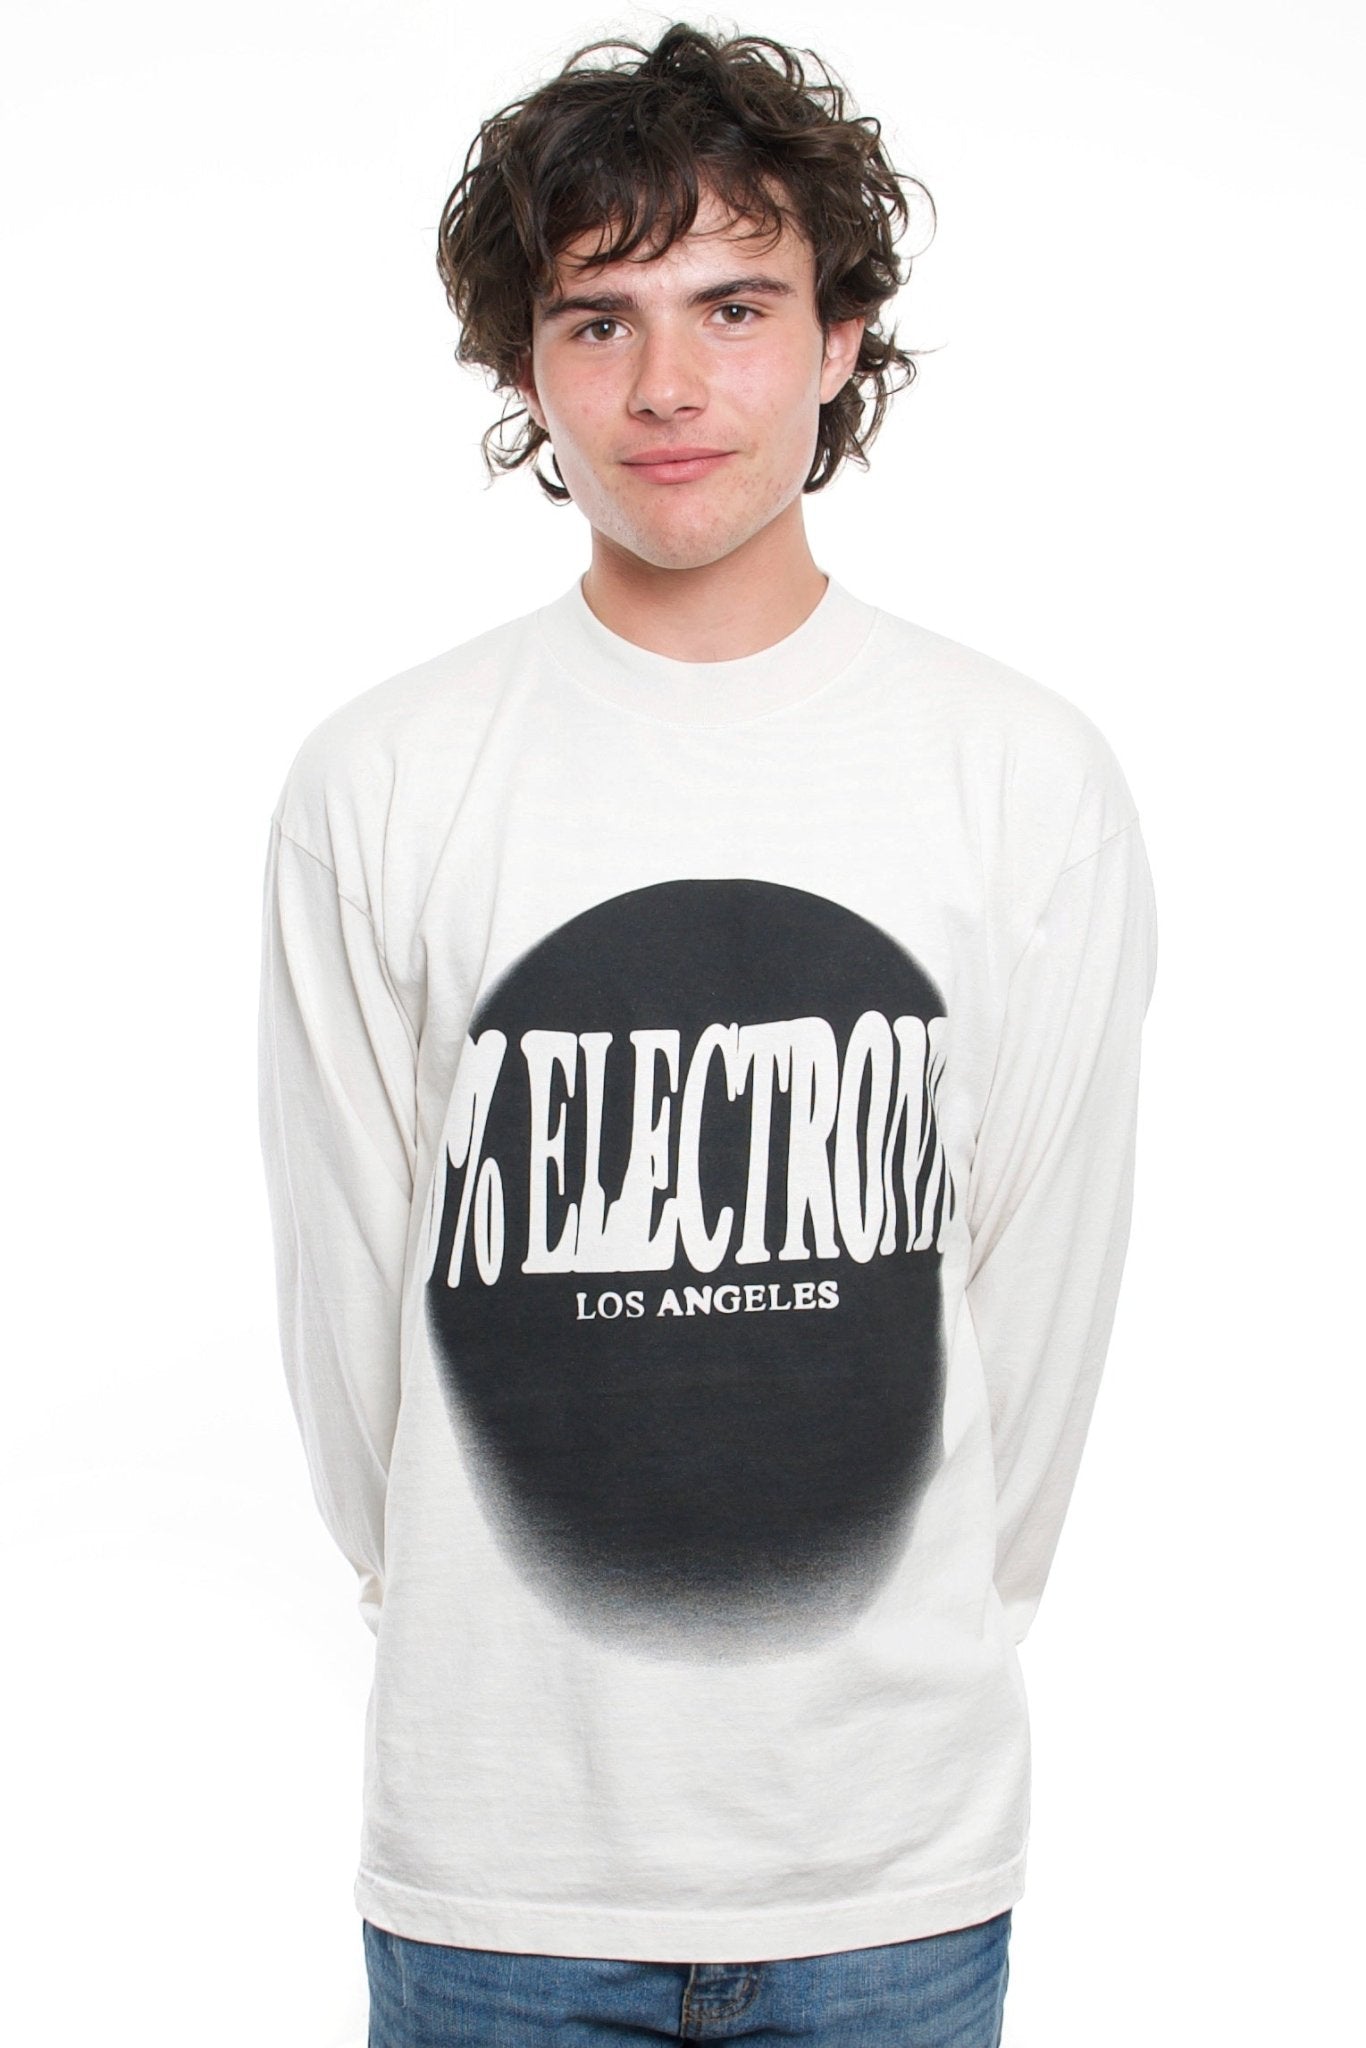 100% Electronica - Spotlight LS T-Shirt - Concrete - 100% Electronica Official Store (Photo 3)